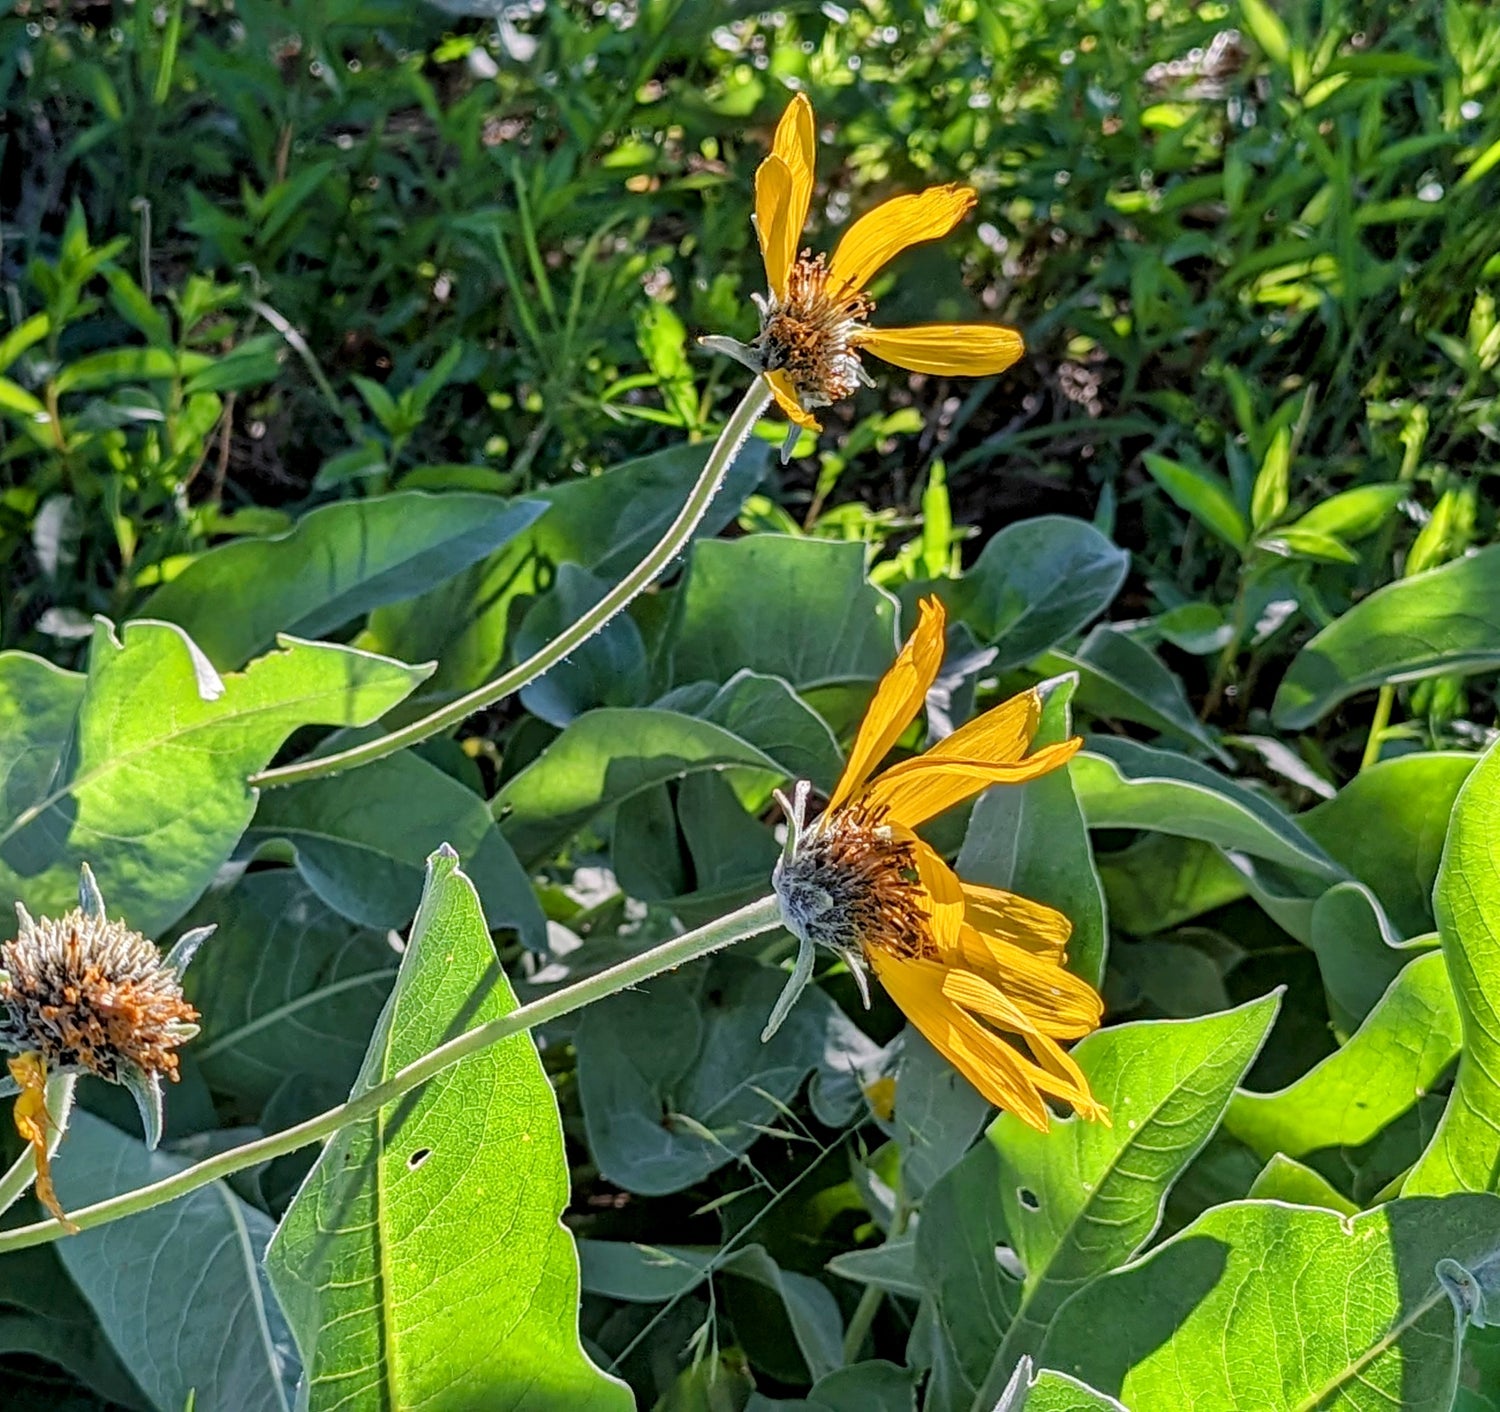 Lessons on Lust from Balsamroot